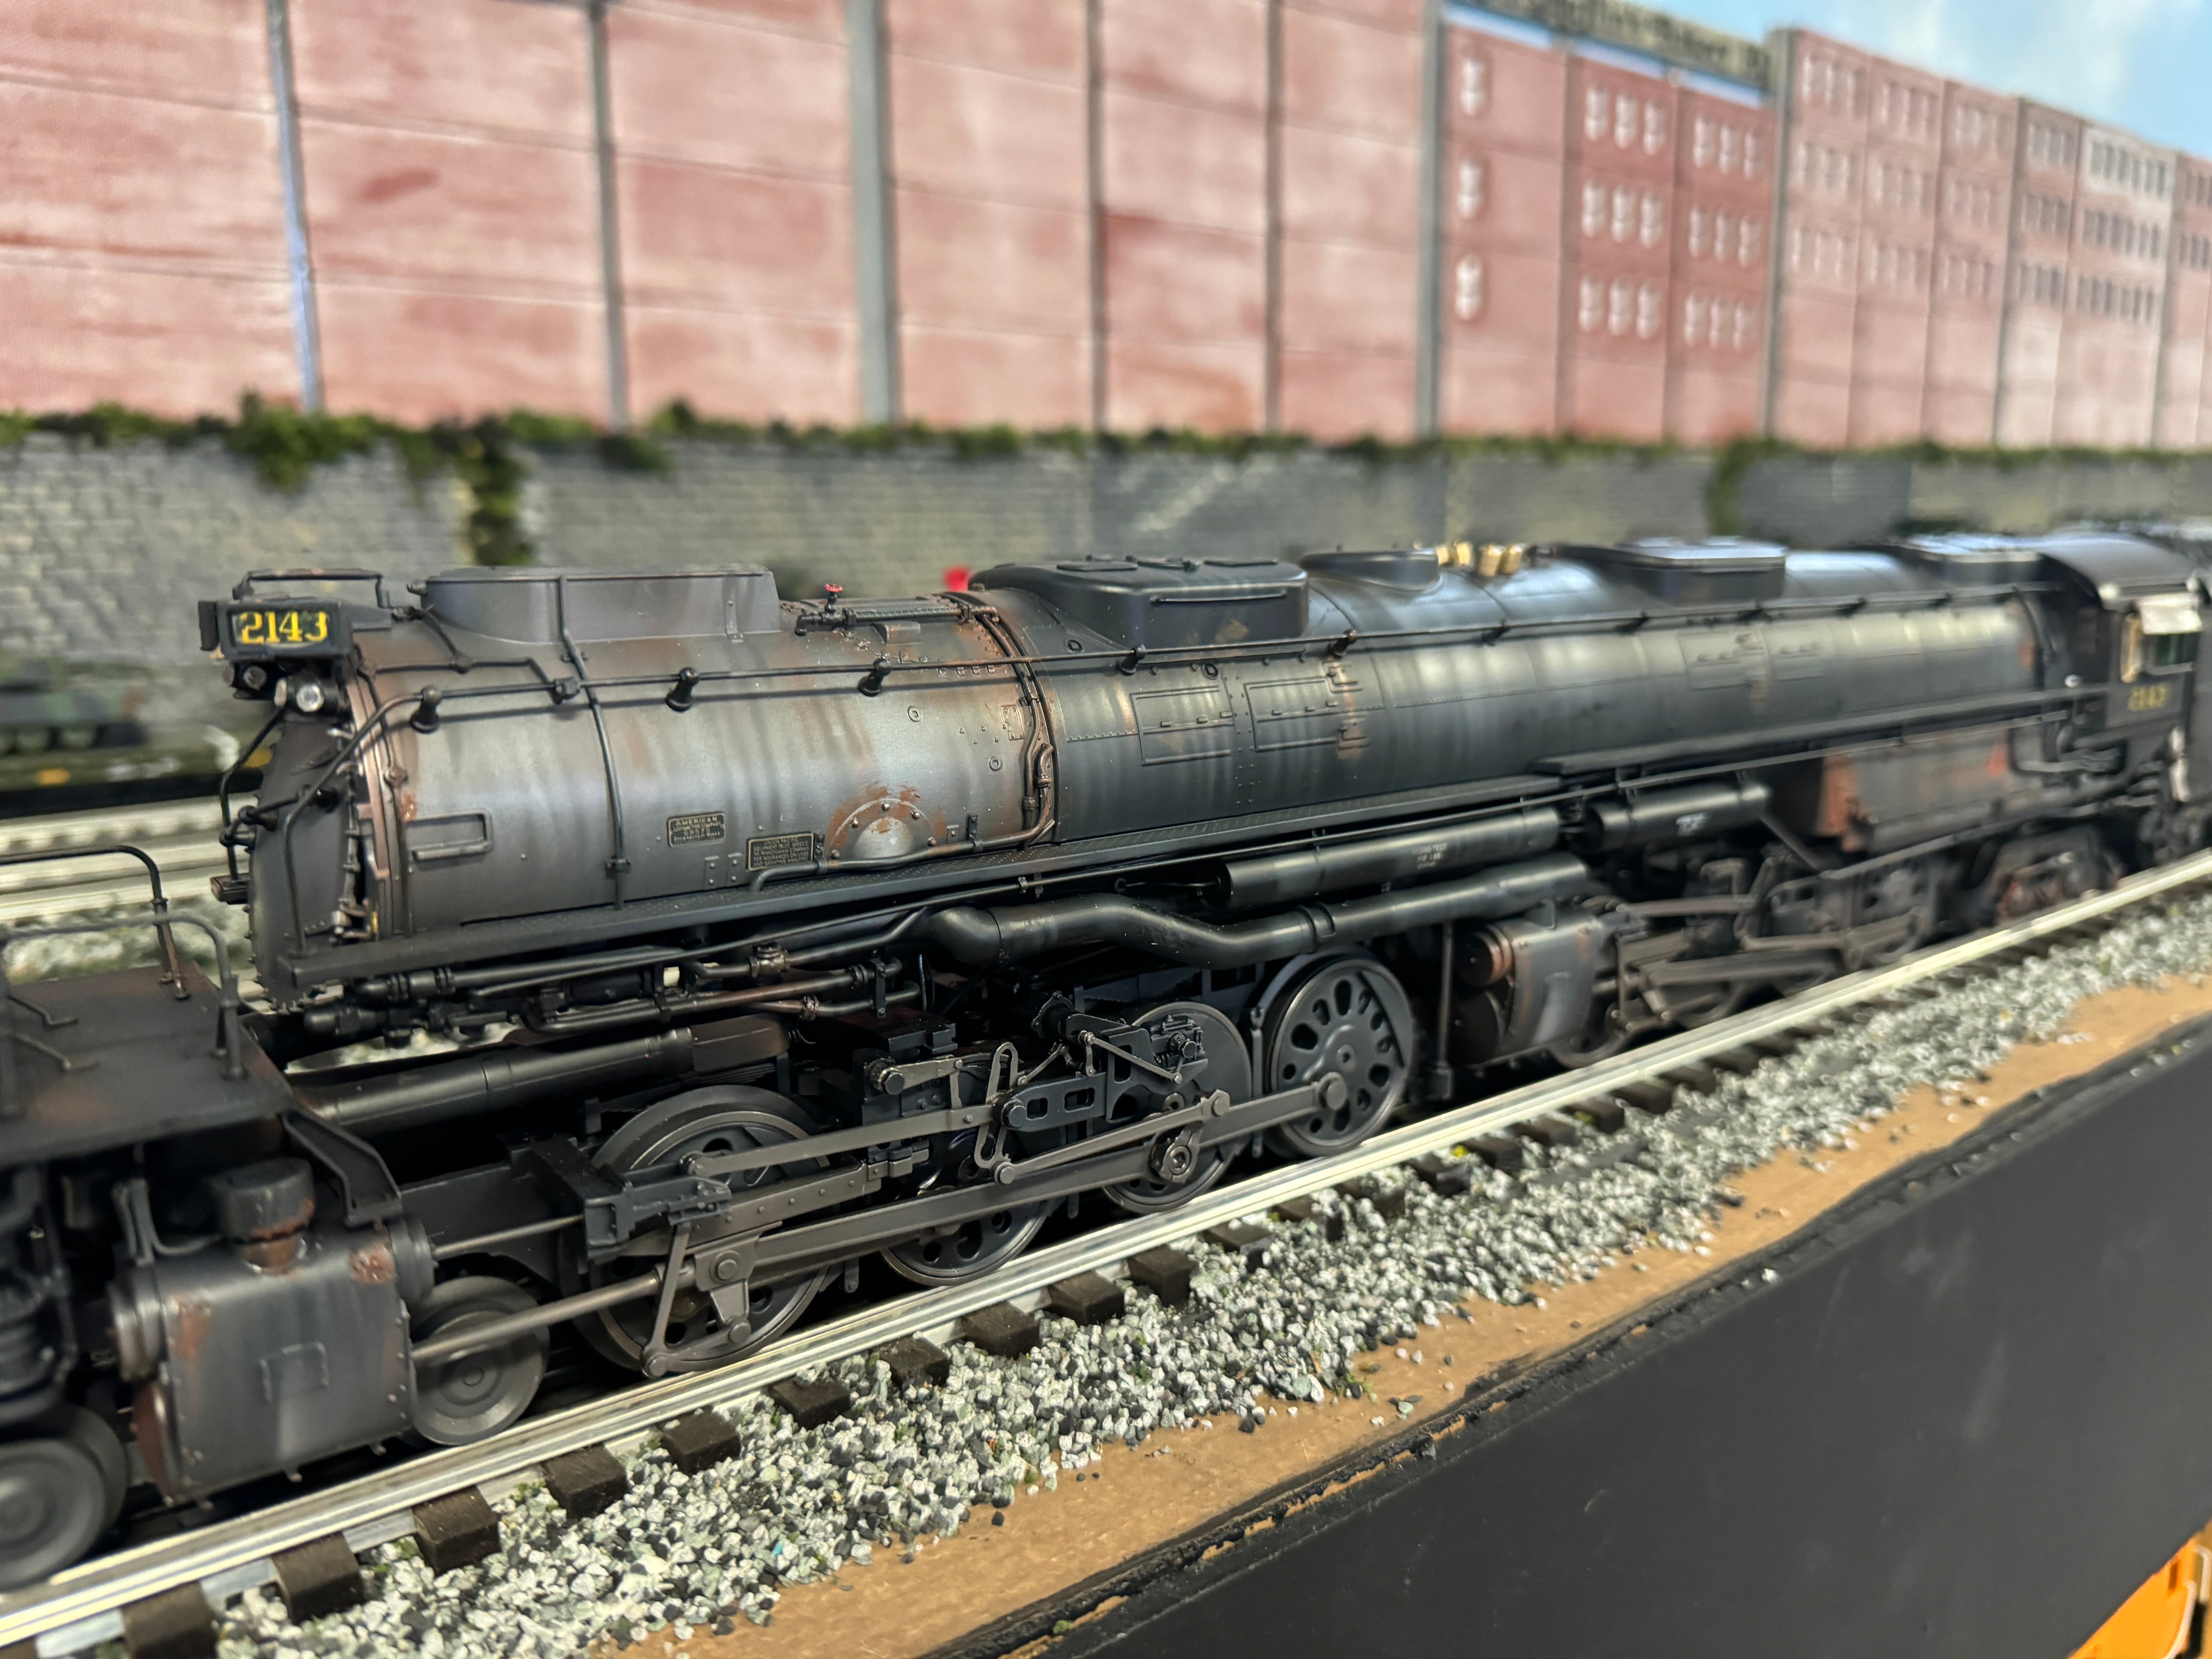 Lionel 2331270NW - Vision Line Big Boy Steam Locomotive "Norfolk & Western" #2143 Custom Pained and Lettered by Harry Hieke